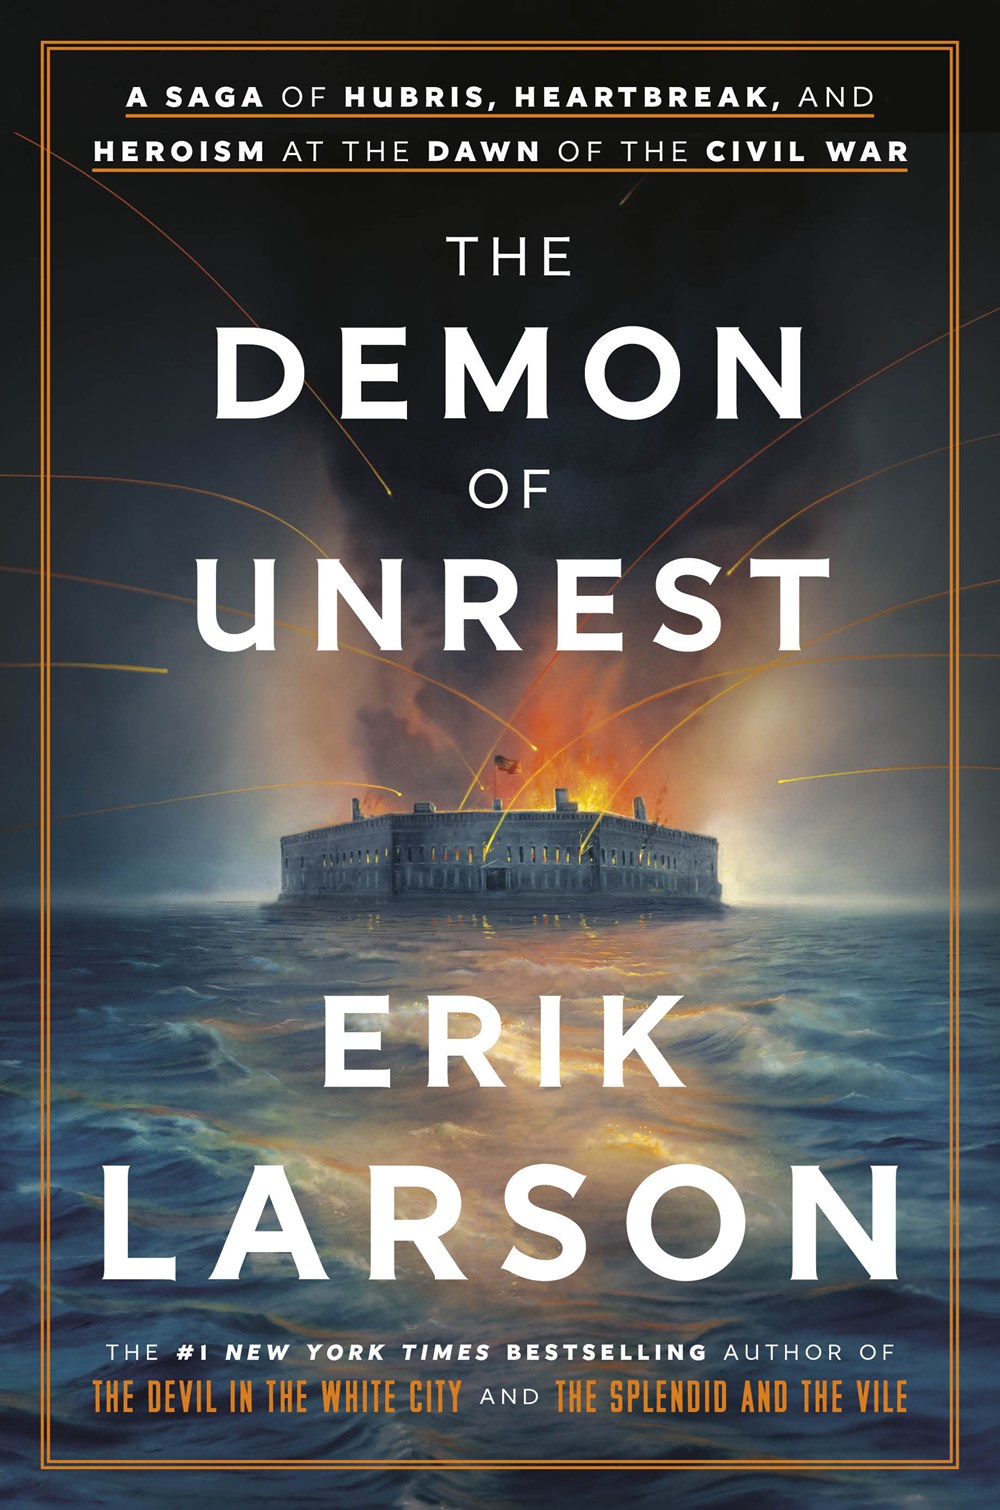 Read-Alikes for ‘The Demon of Unrest’ by Erik Larson | LibraryReads